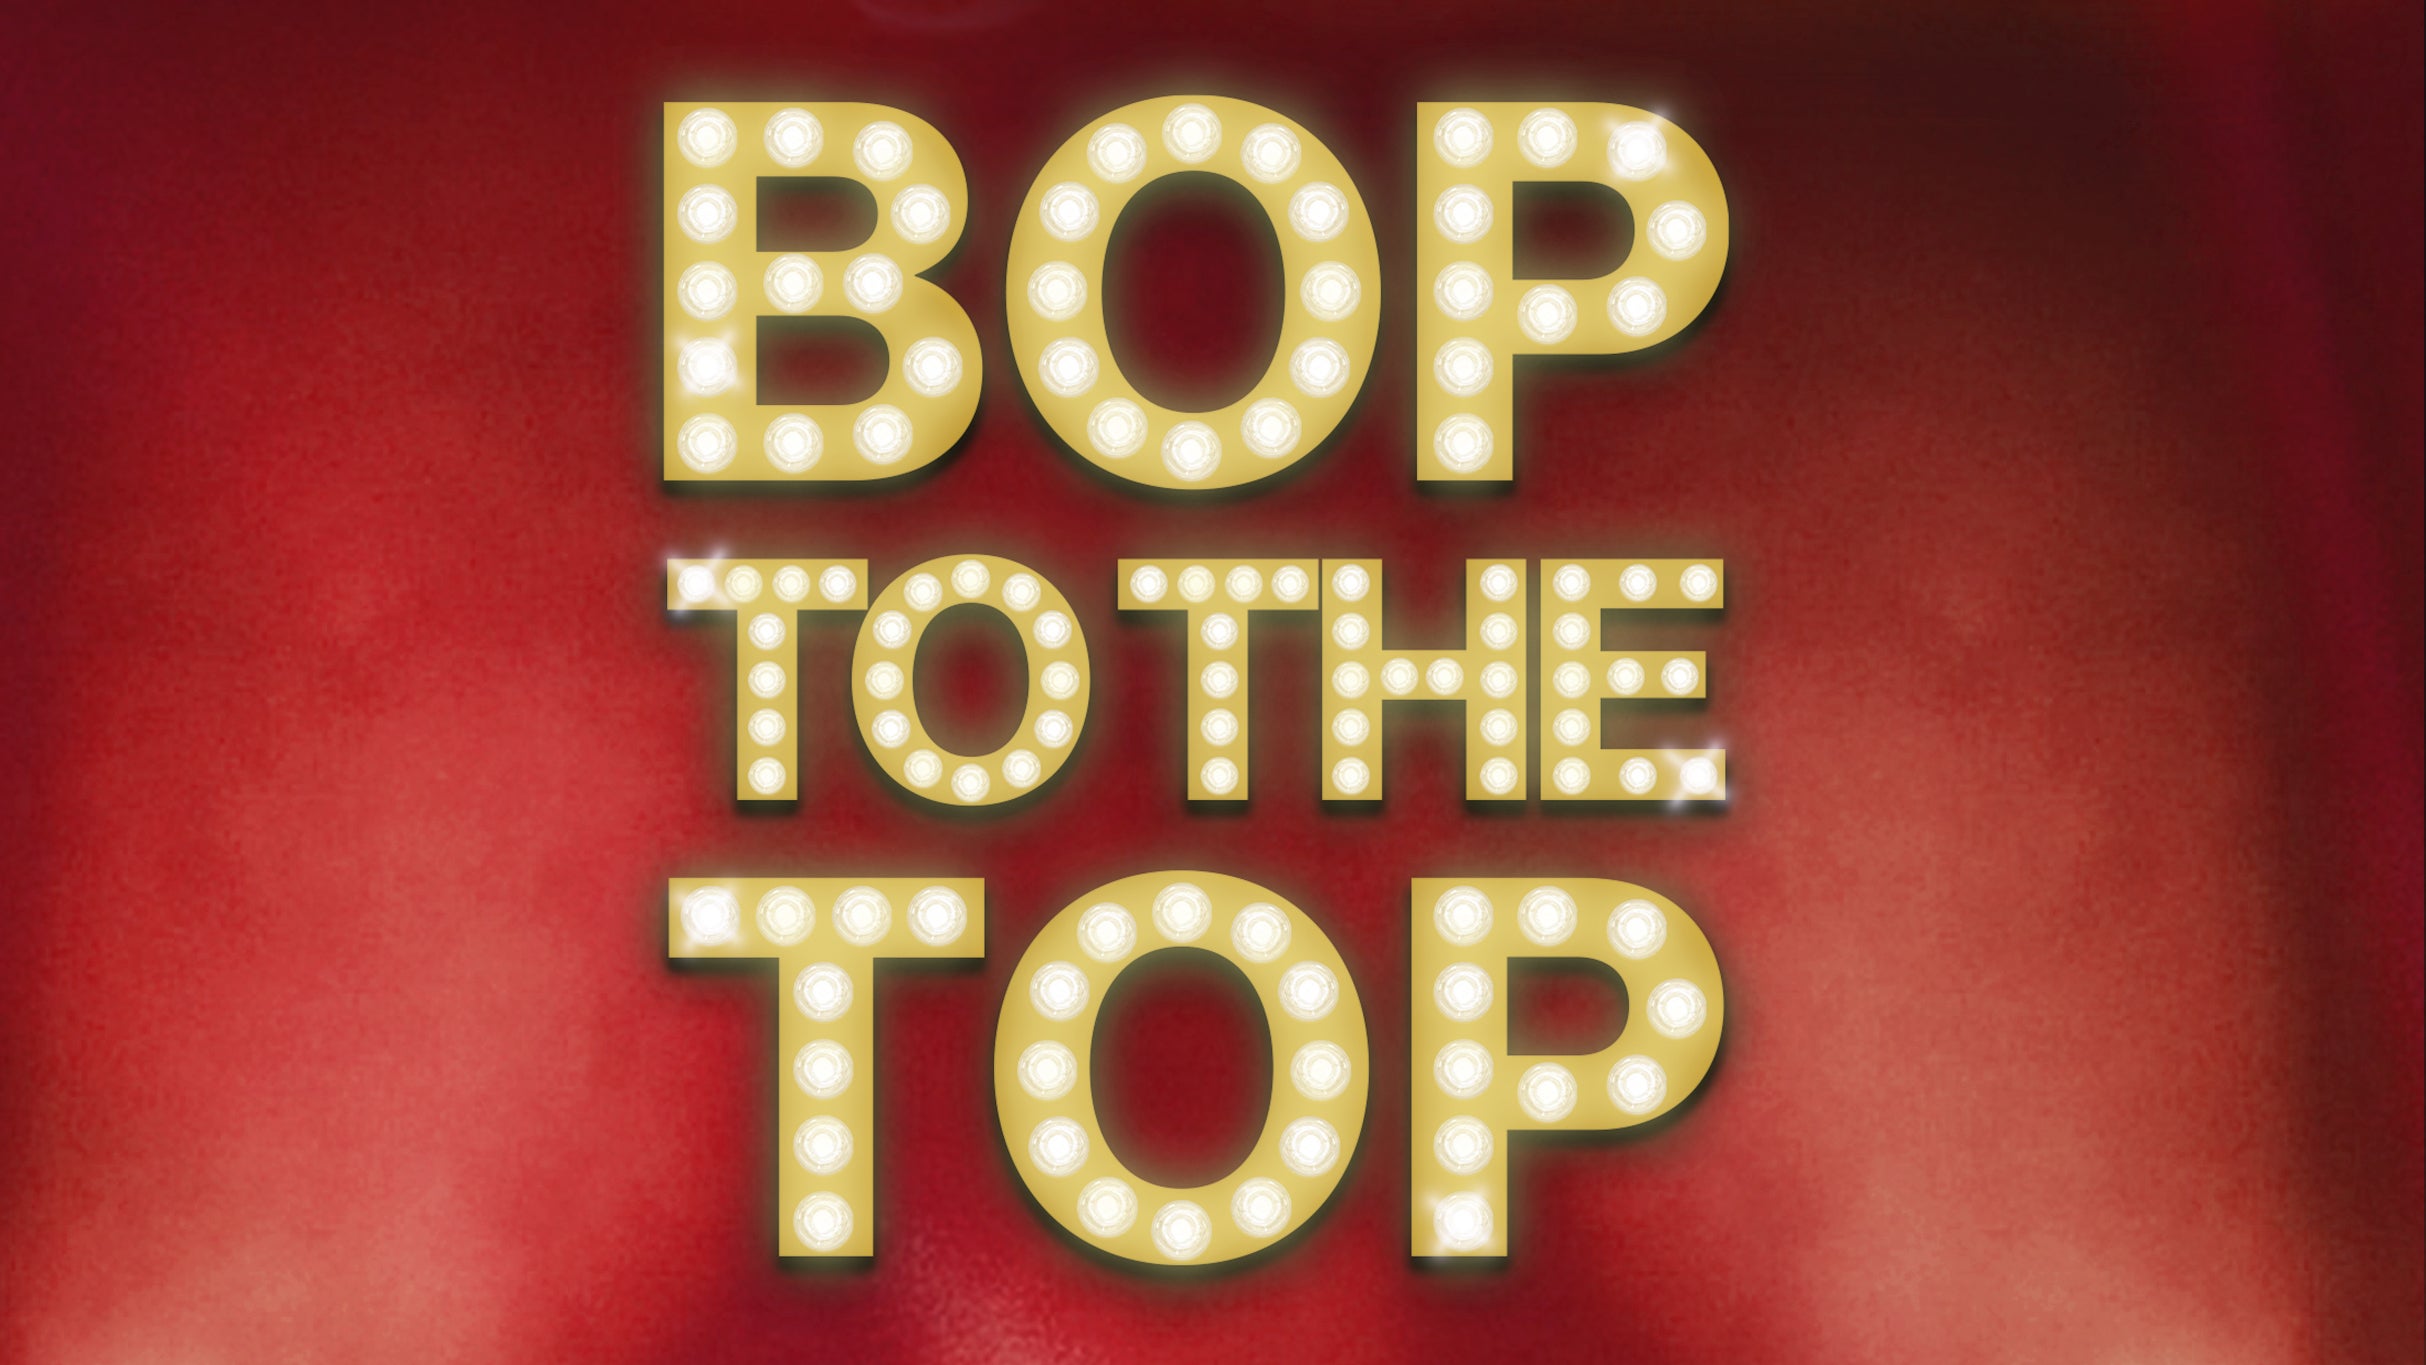 Bop To The Top - 18+ Only, ID Required for Entry free pre-sale listing for performance tickets in San Antonio, TX (Aztec Theatre )